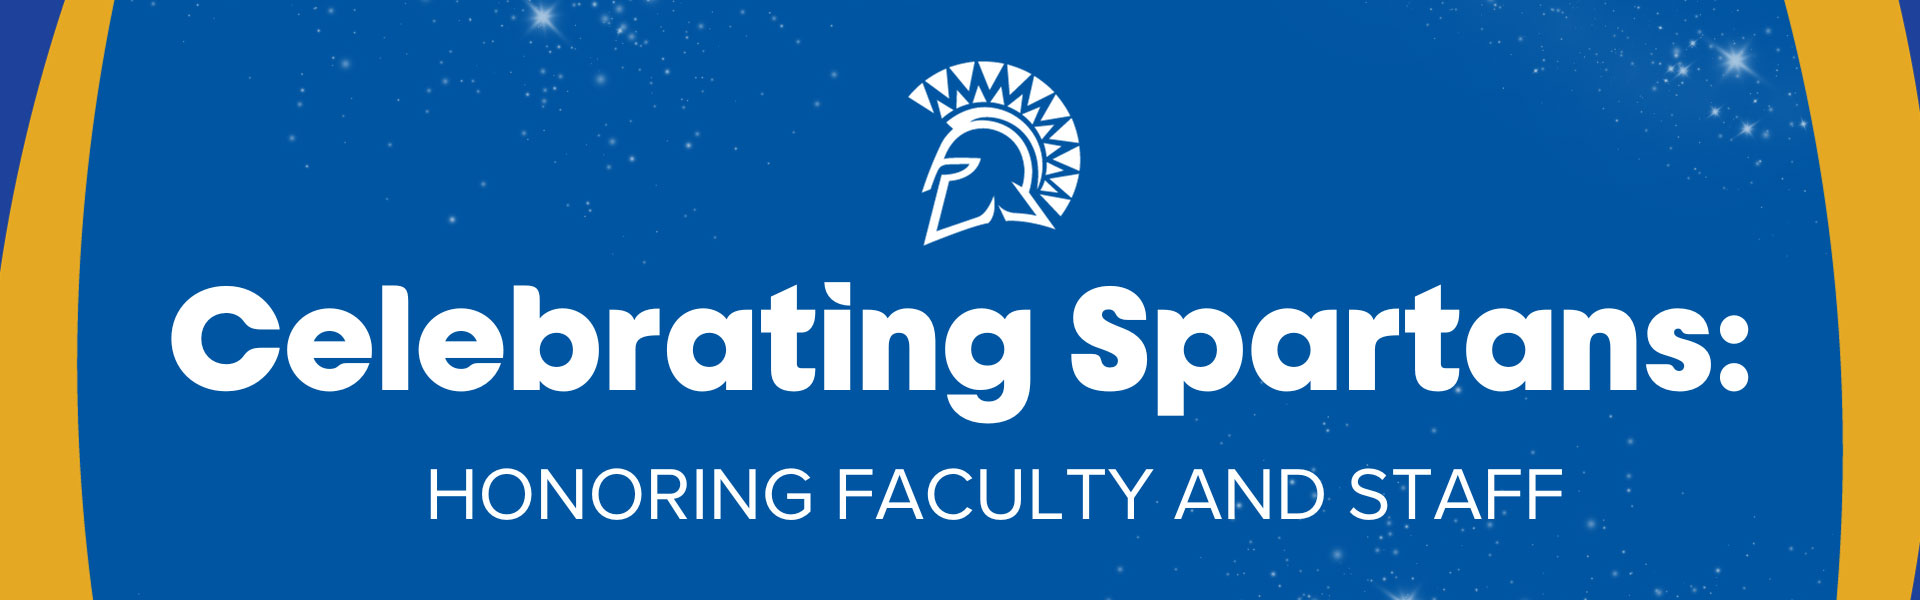 Celebrating Spartans: Honoring Faculty and Staff